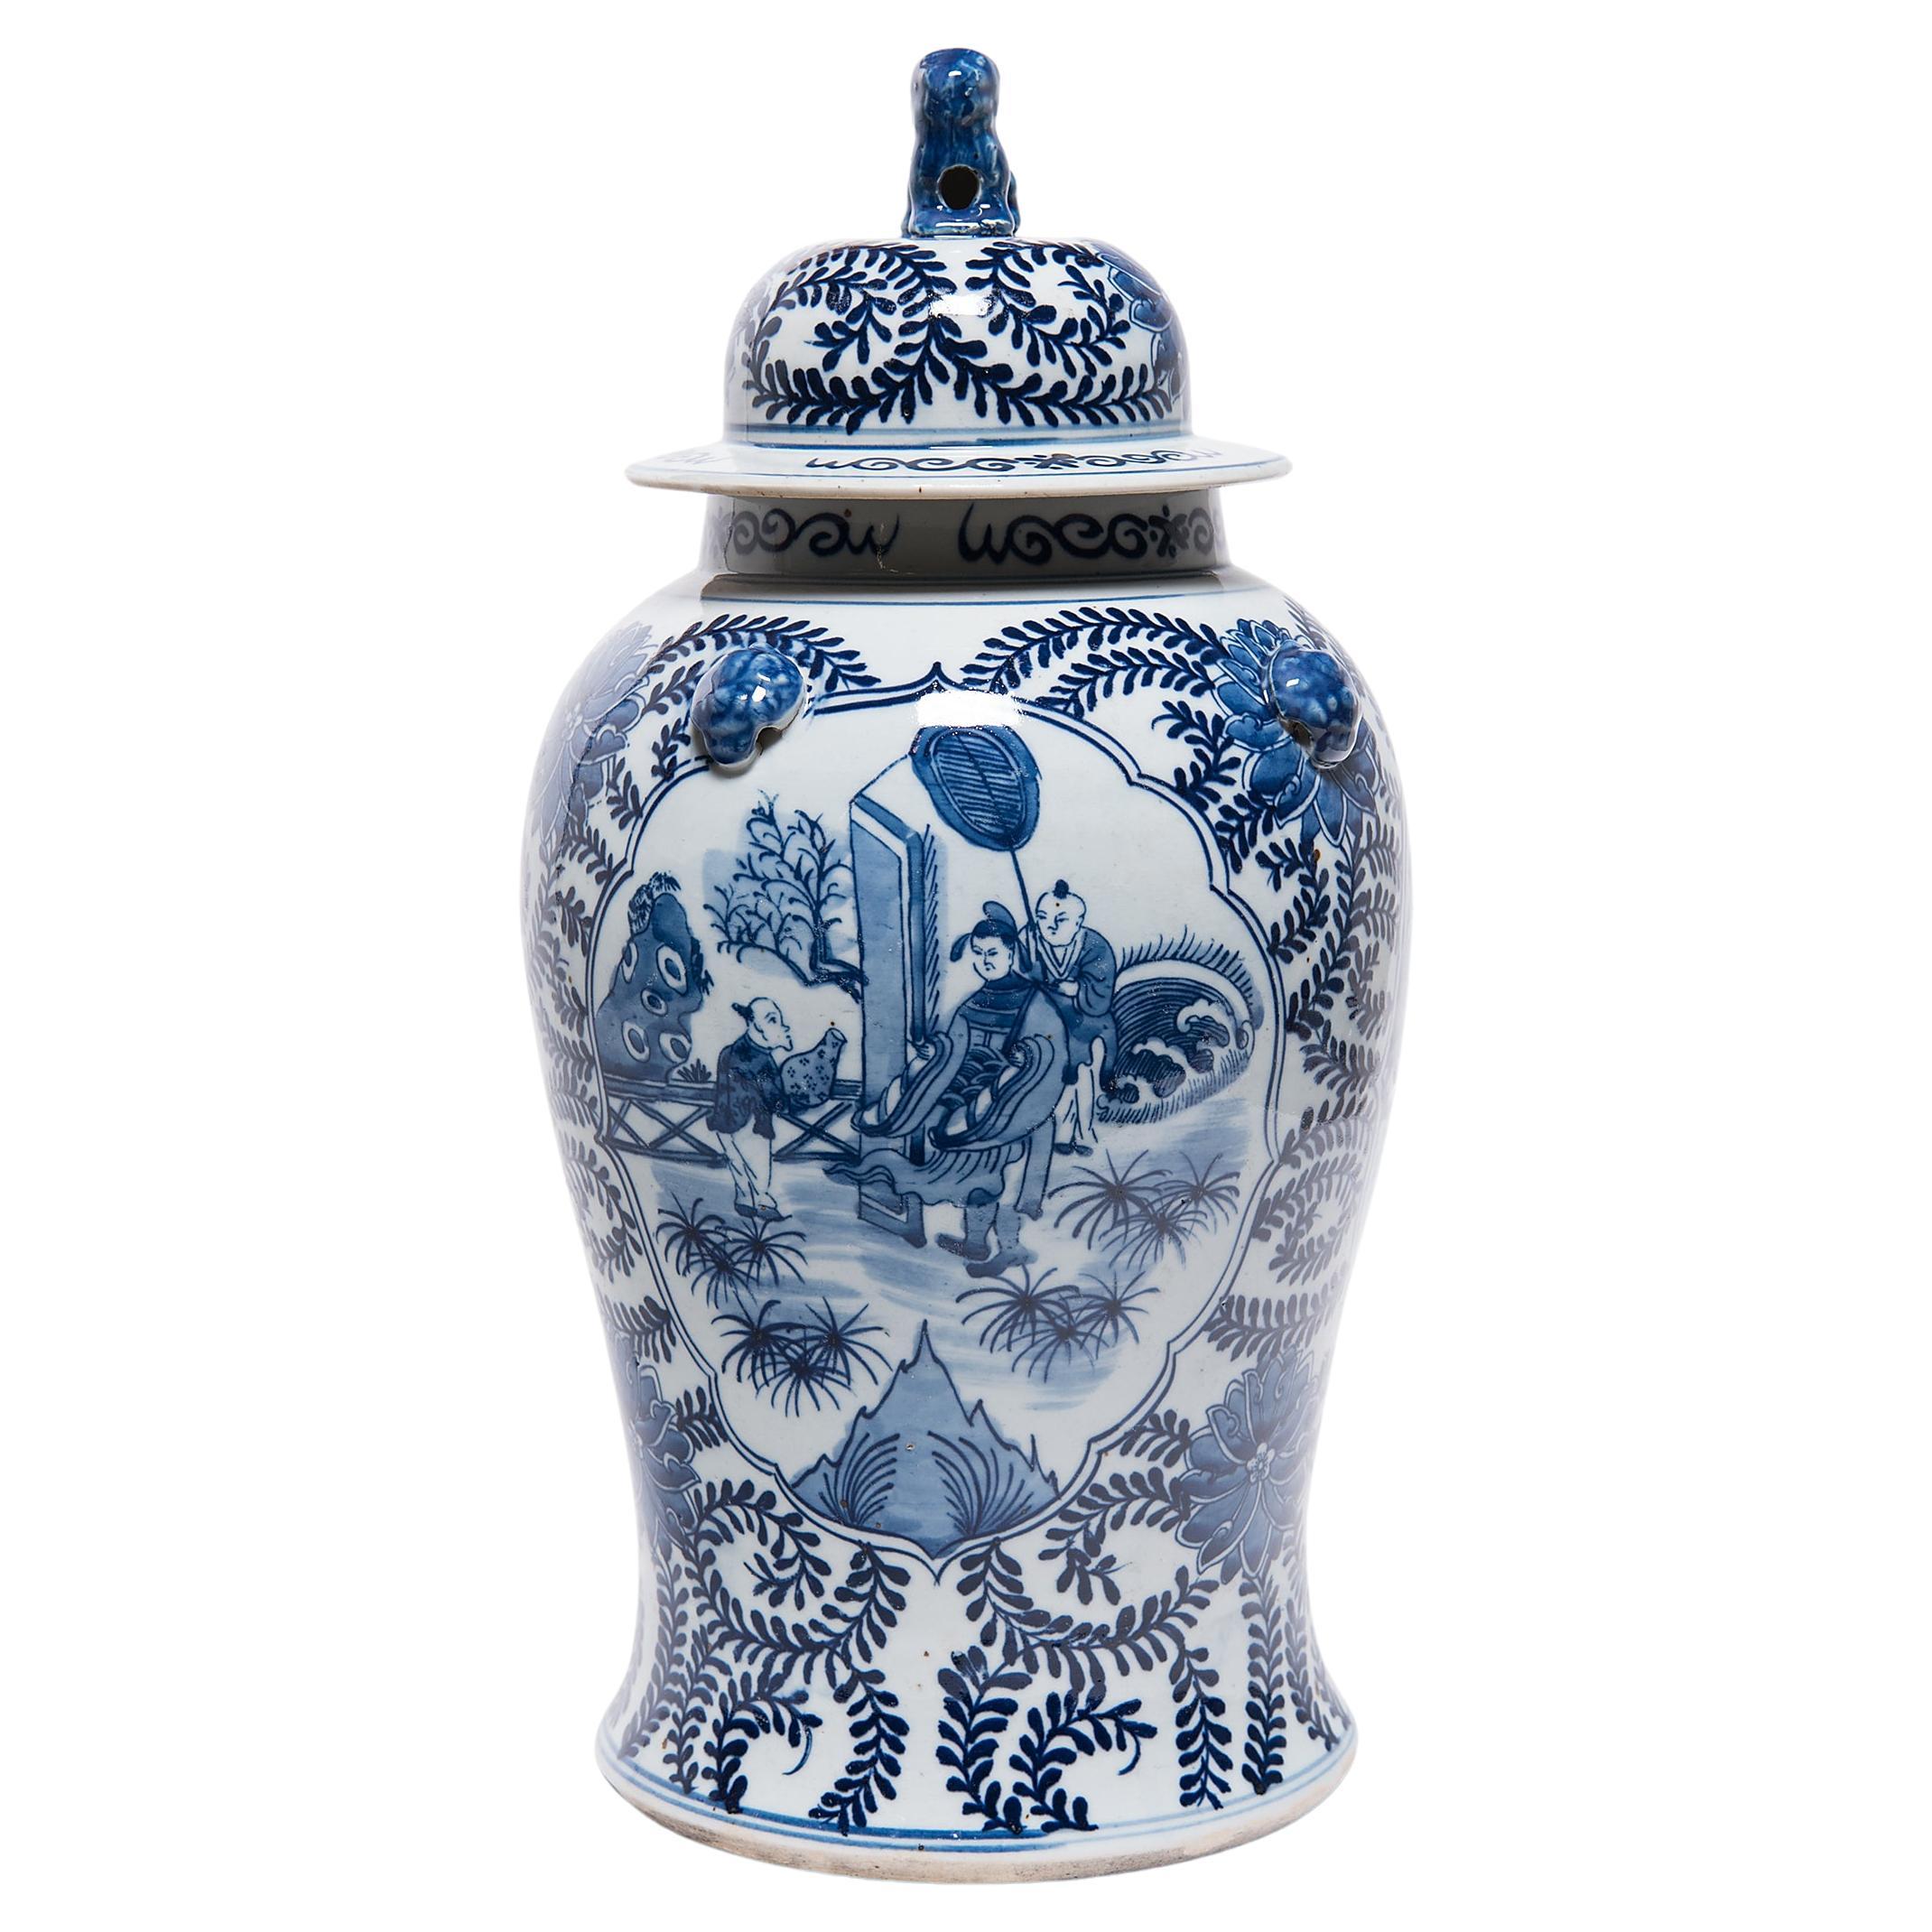 Chinese Blue and White Perpetual Harmony Baluster Jar